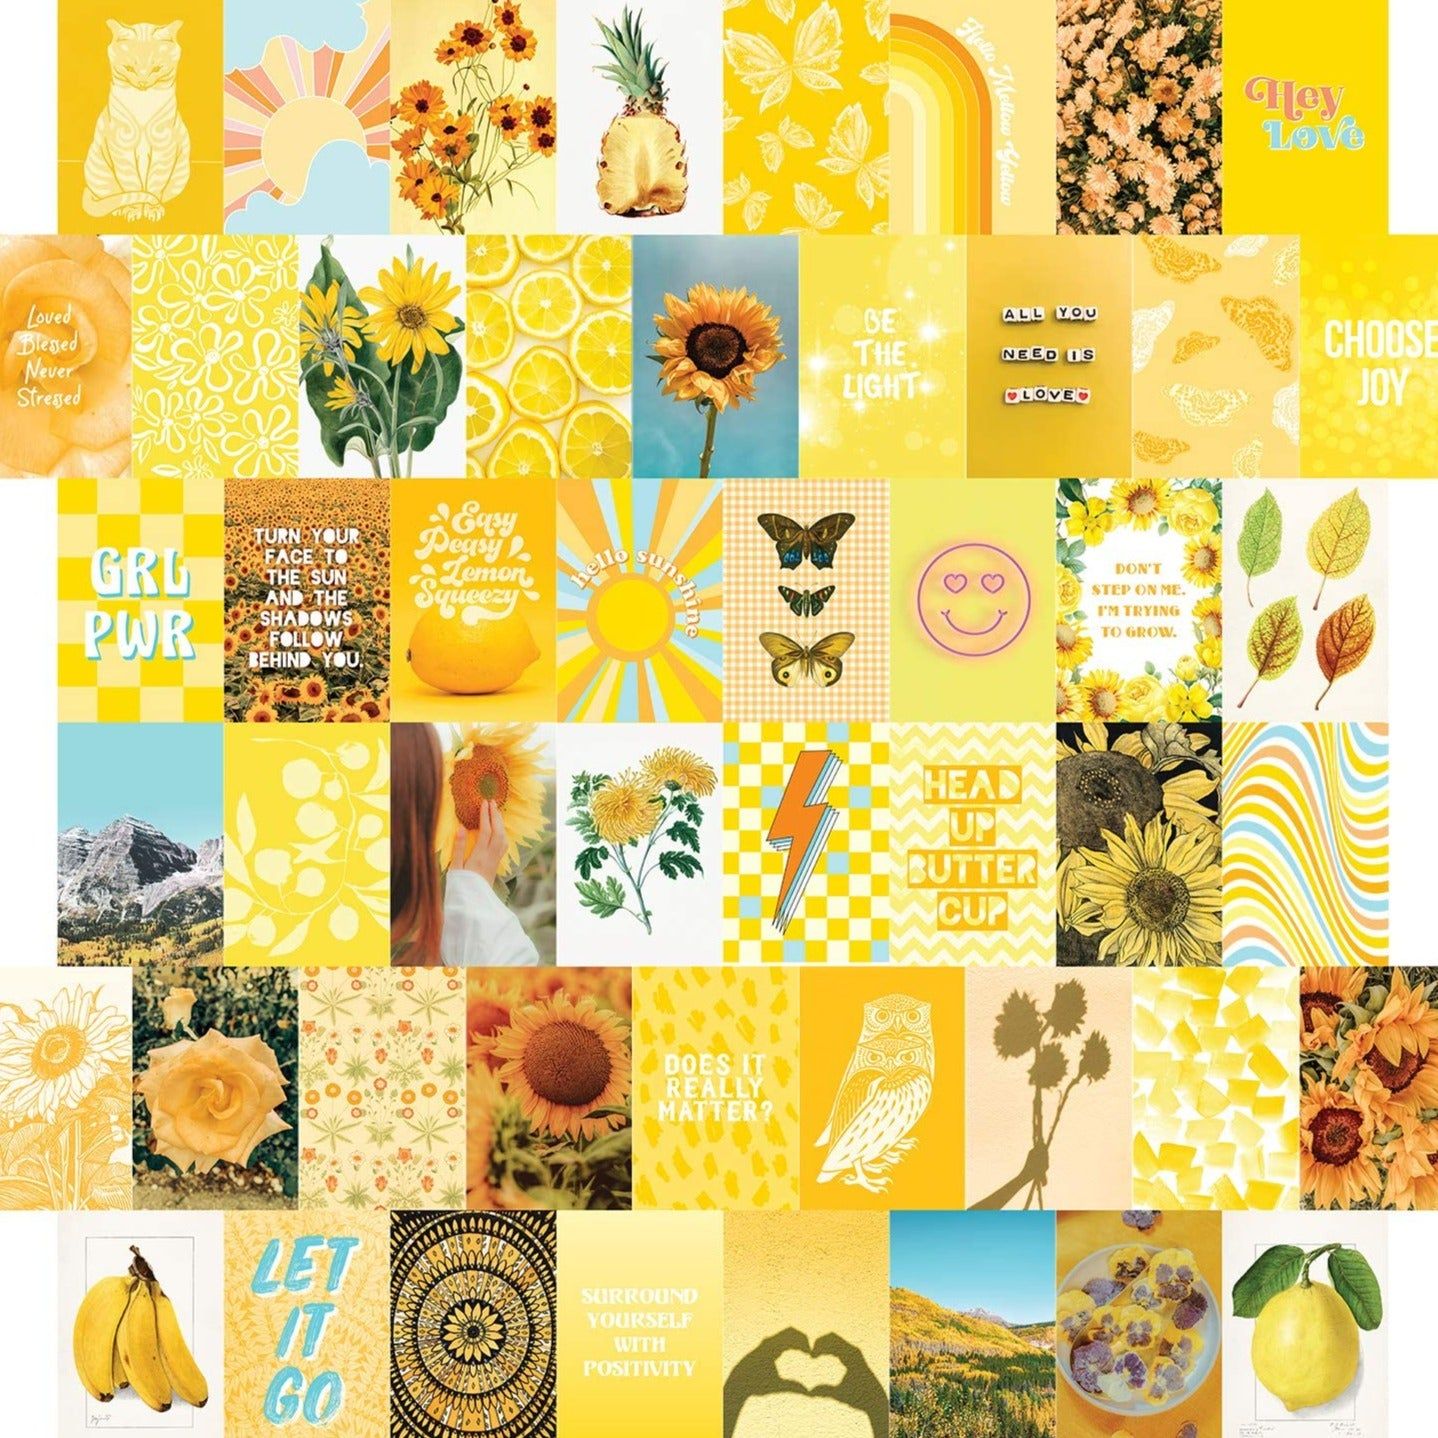 A collage of 50 pictures in yellow, orange, and white. - Light yellow